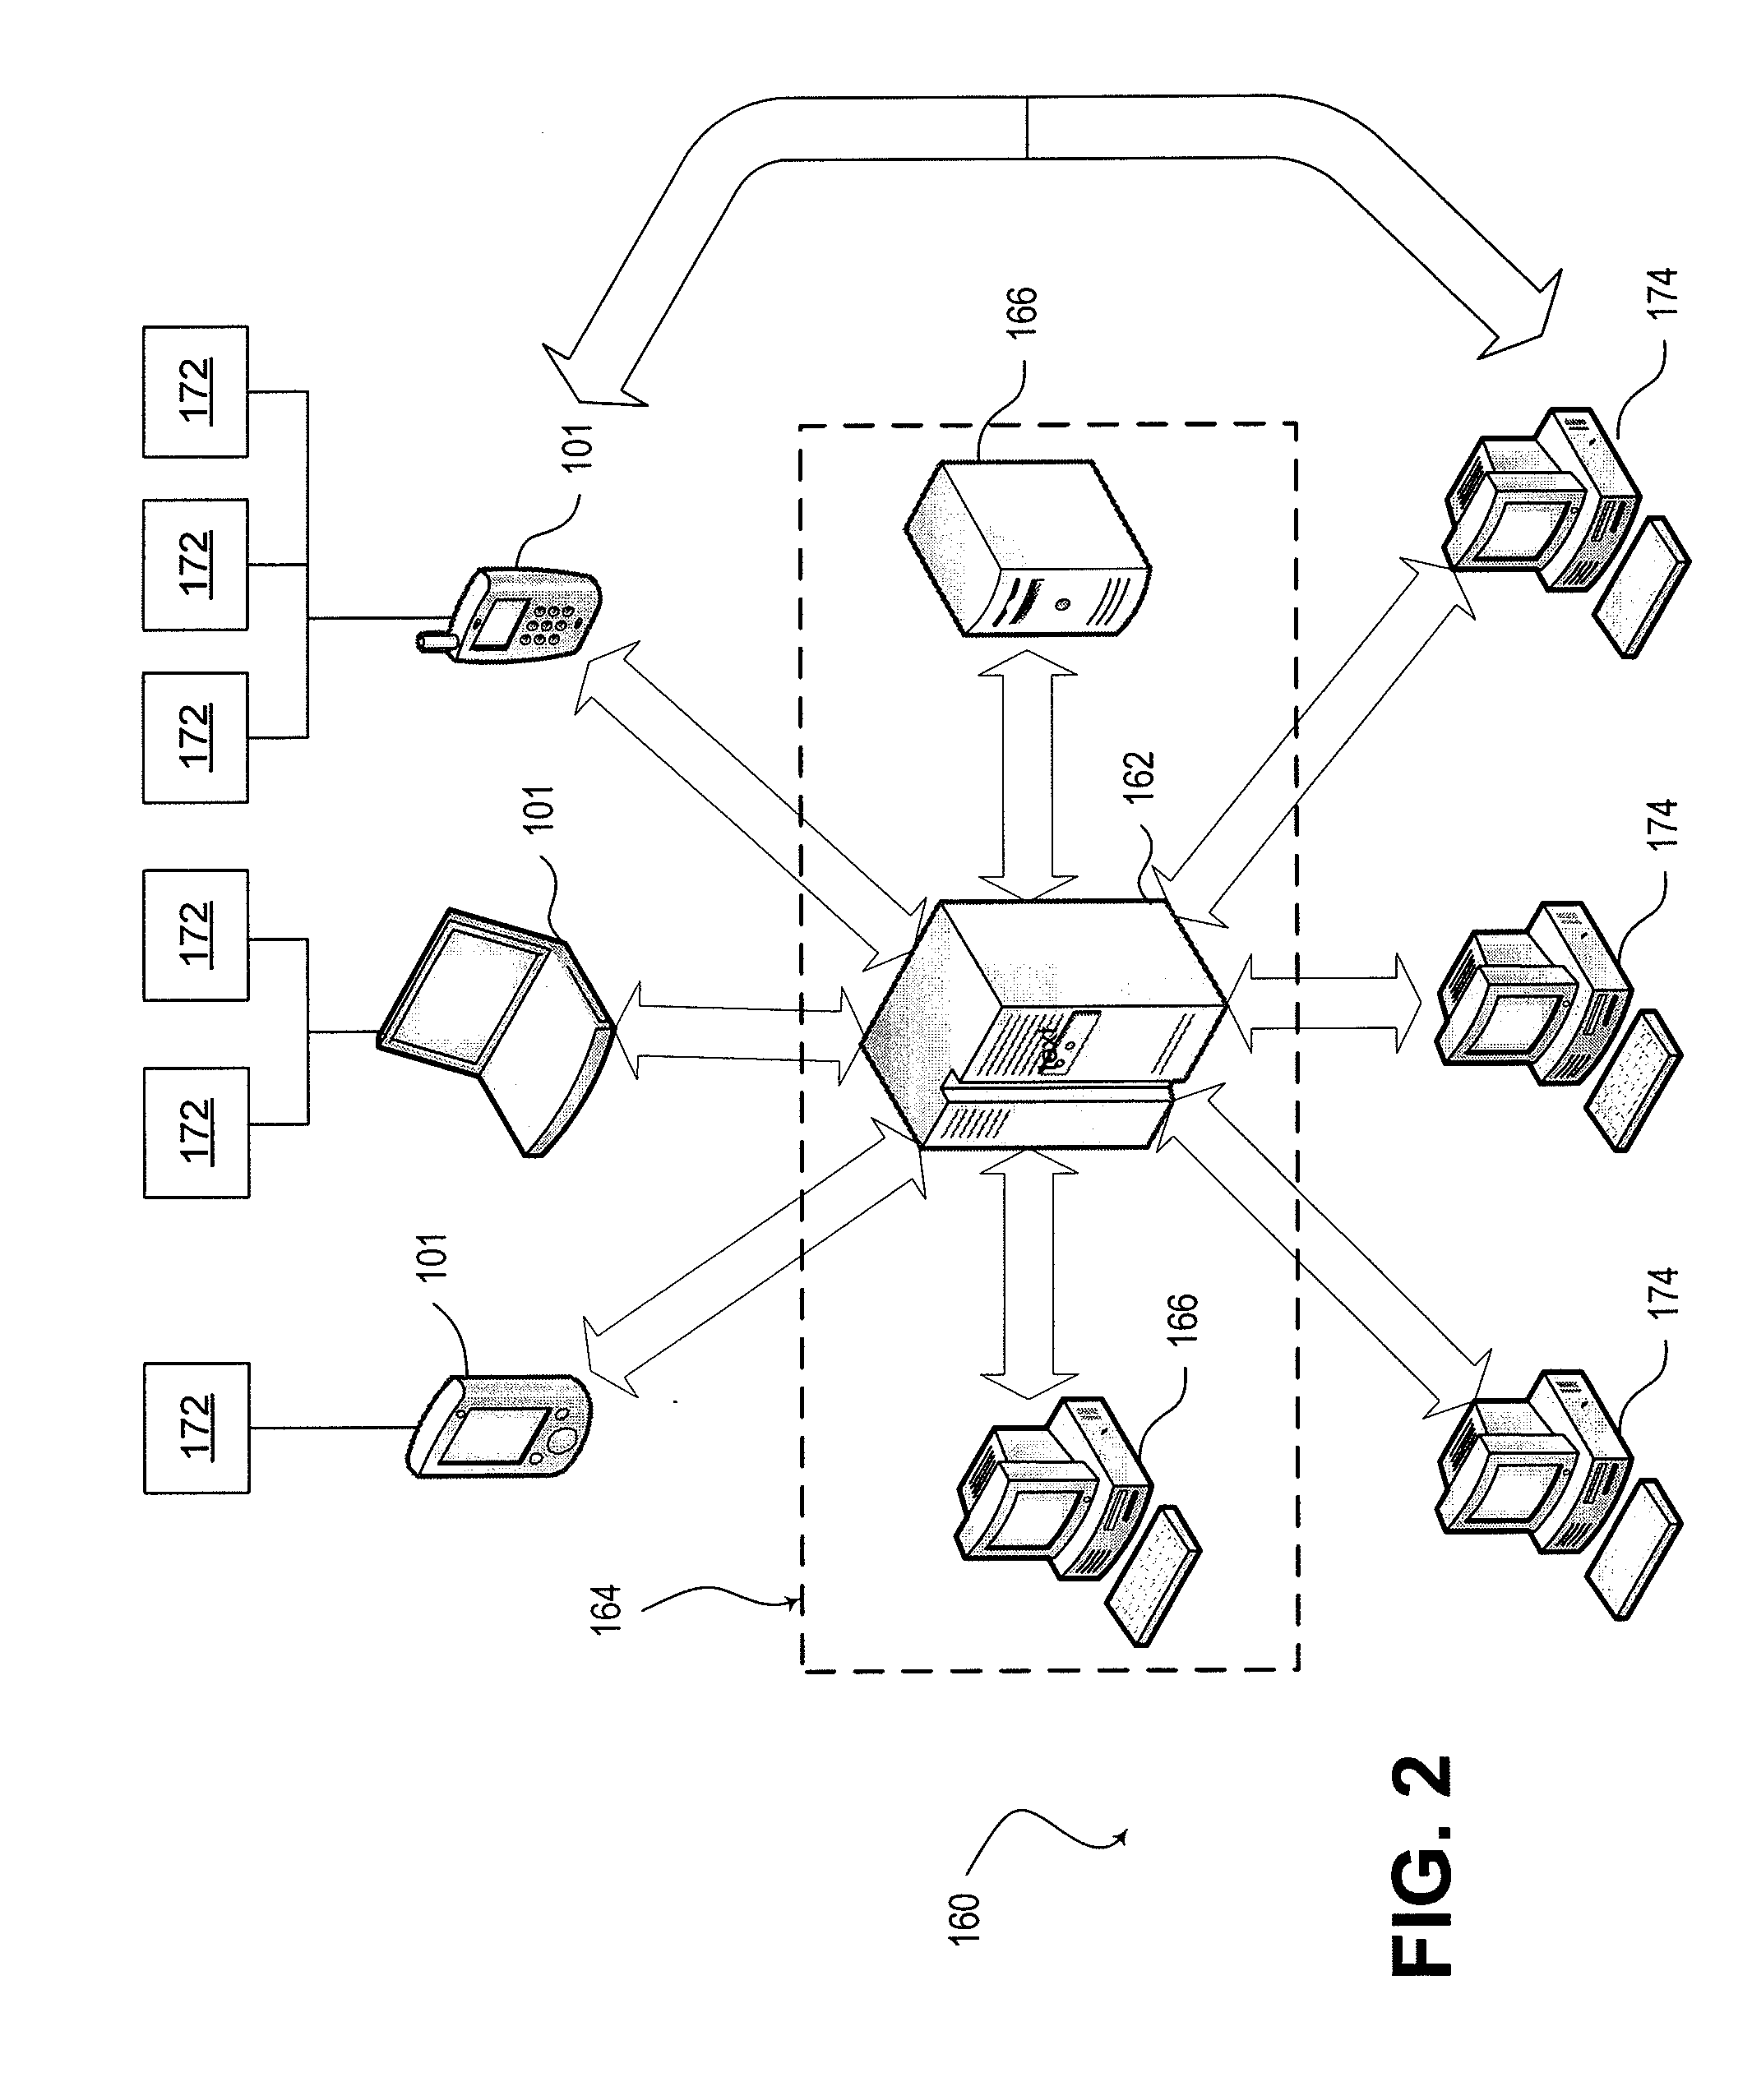 Authentication methods for use in financial transactions and information banking